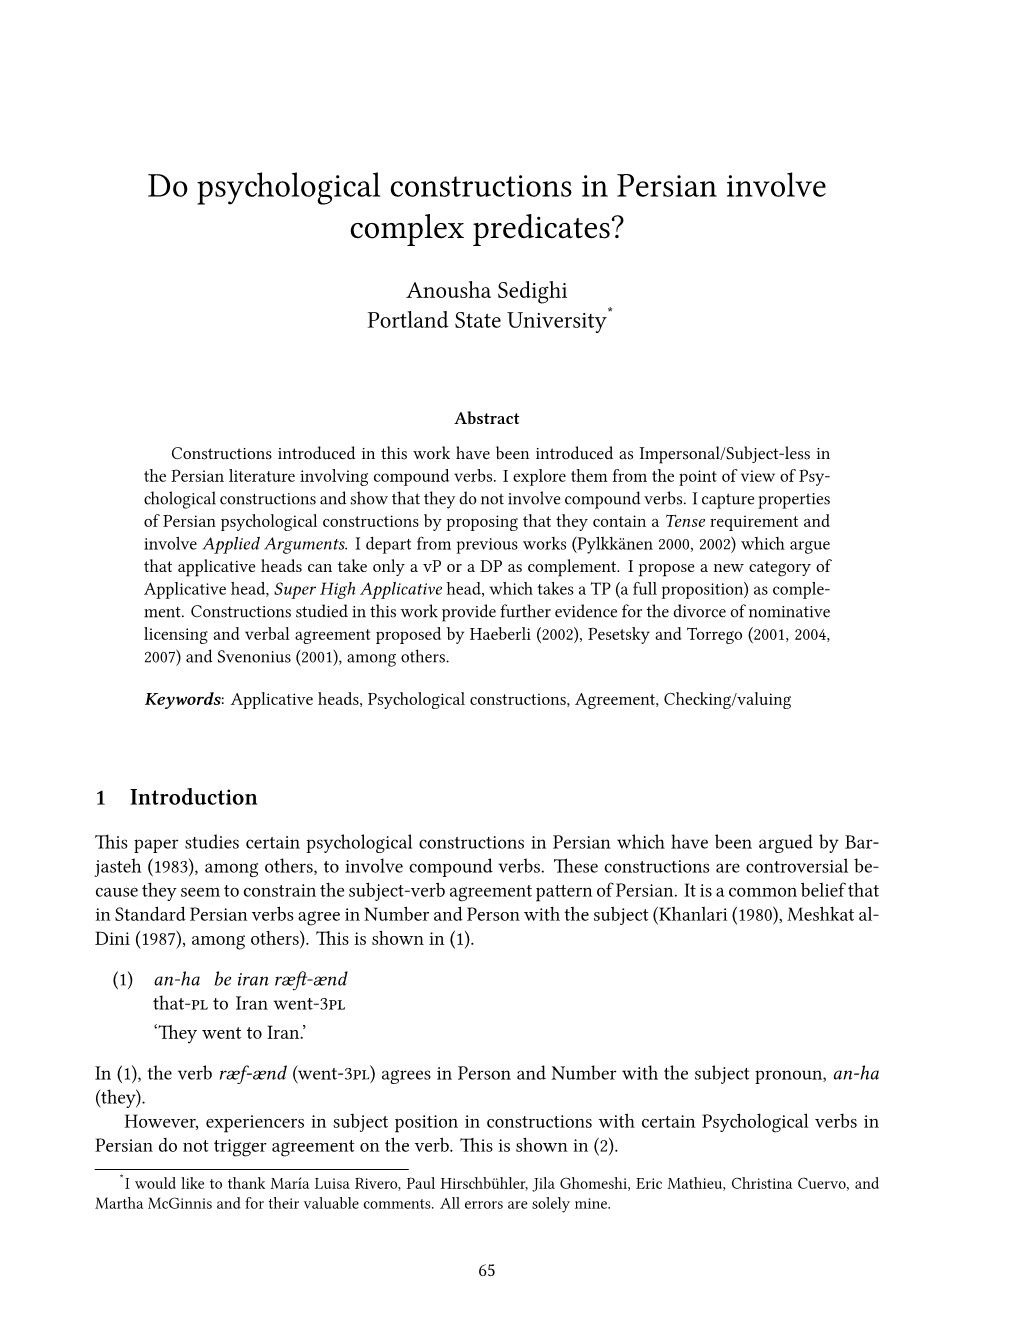 Do Psy Ological Constructions in Persian Involve Complex Predicates?